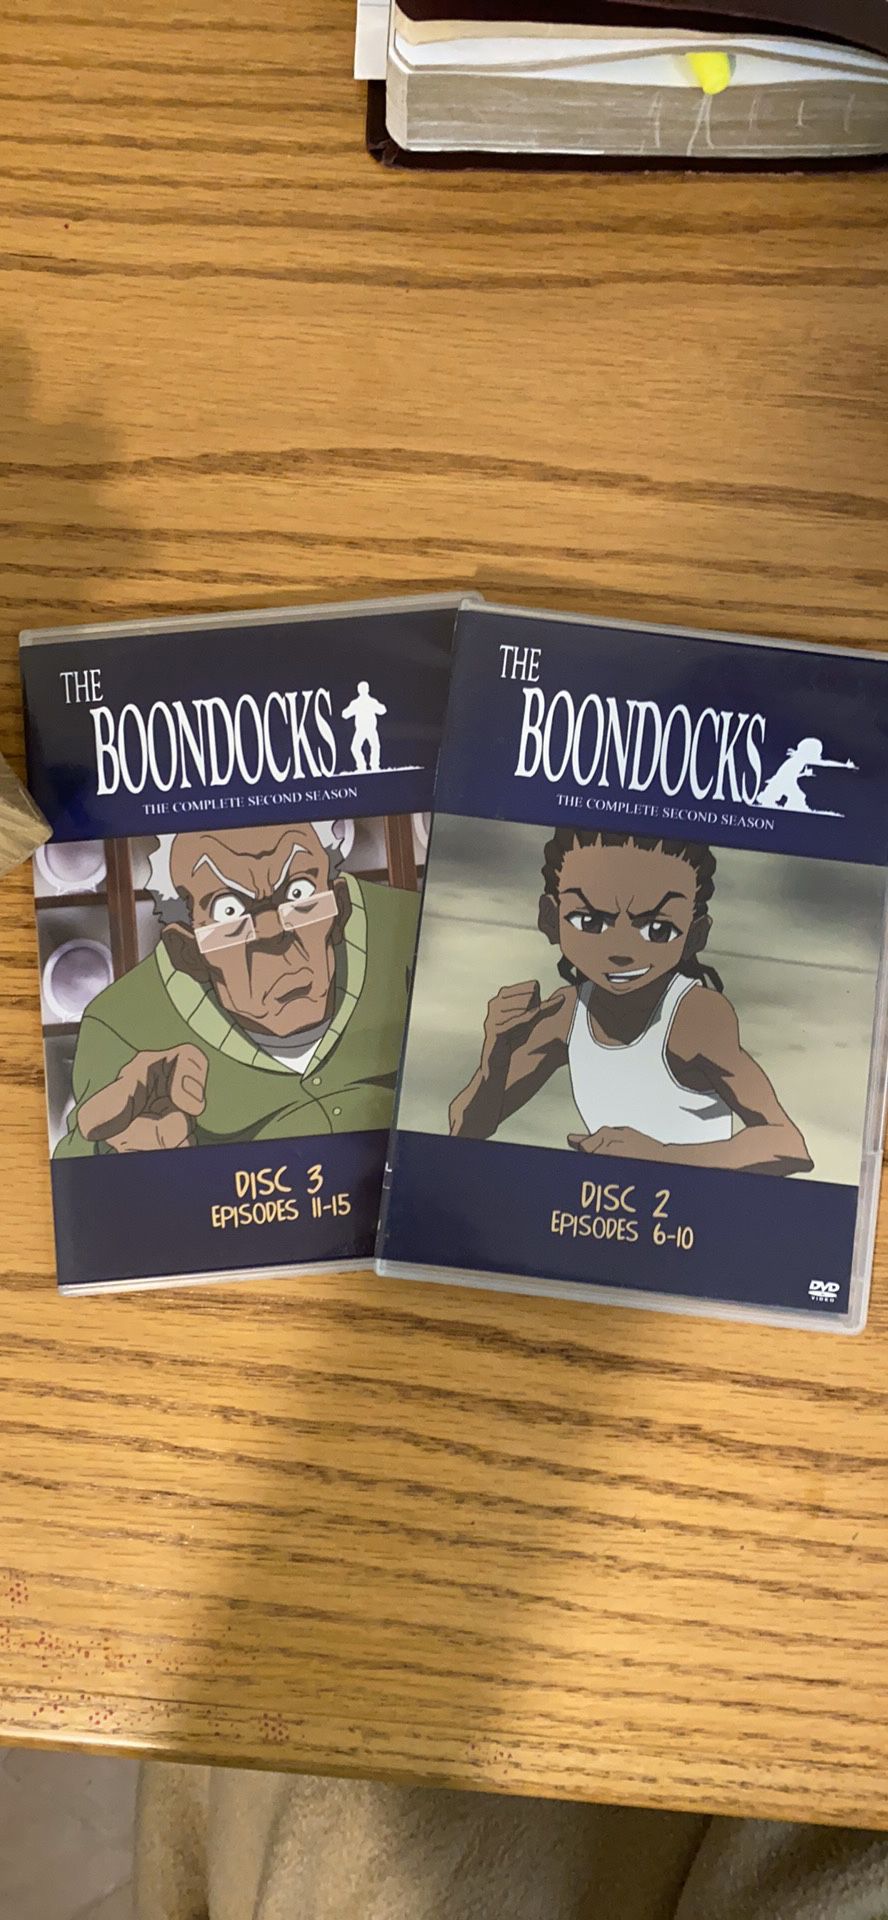 The boondocks dvds